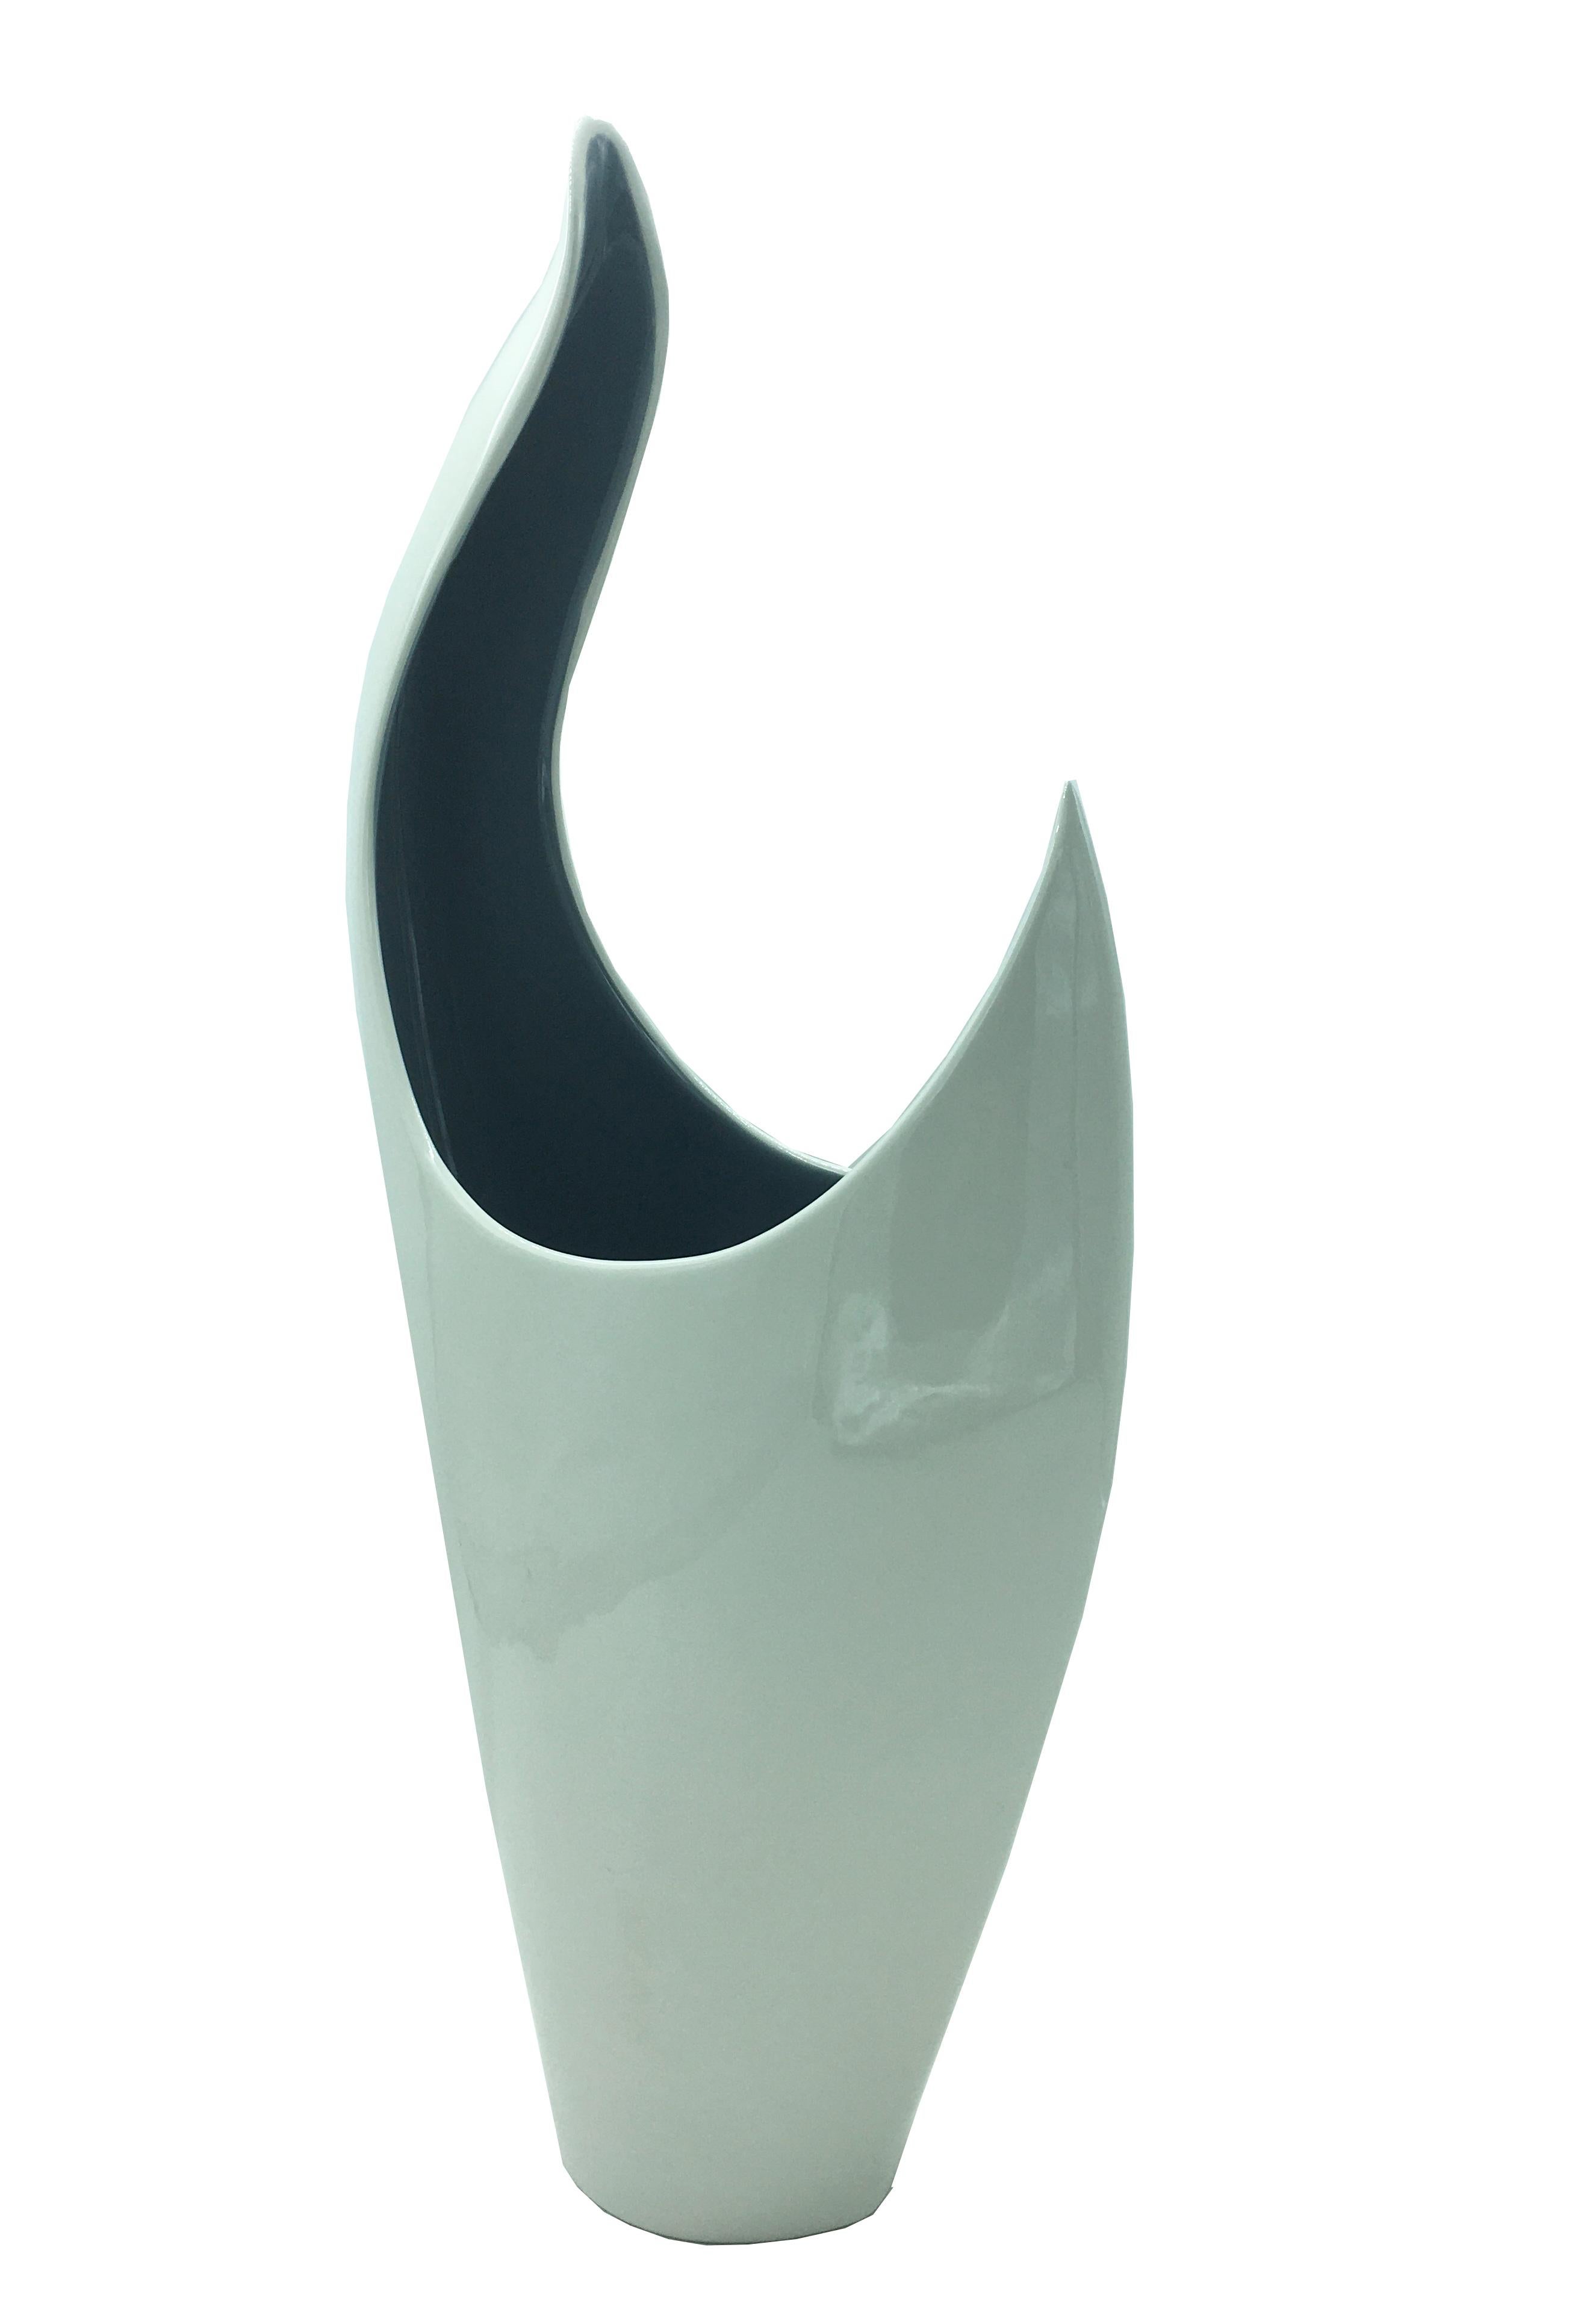 Elegant indoor vase made of fine white ceramic with gray interior.
Italian design with simple and sinuous shapes.